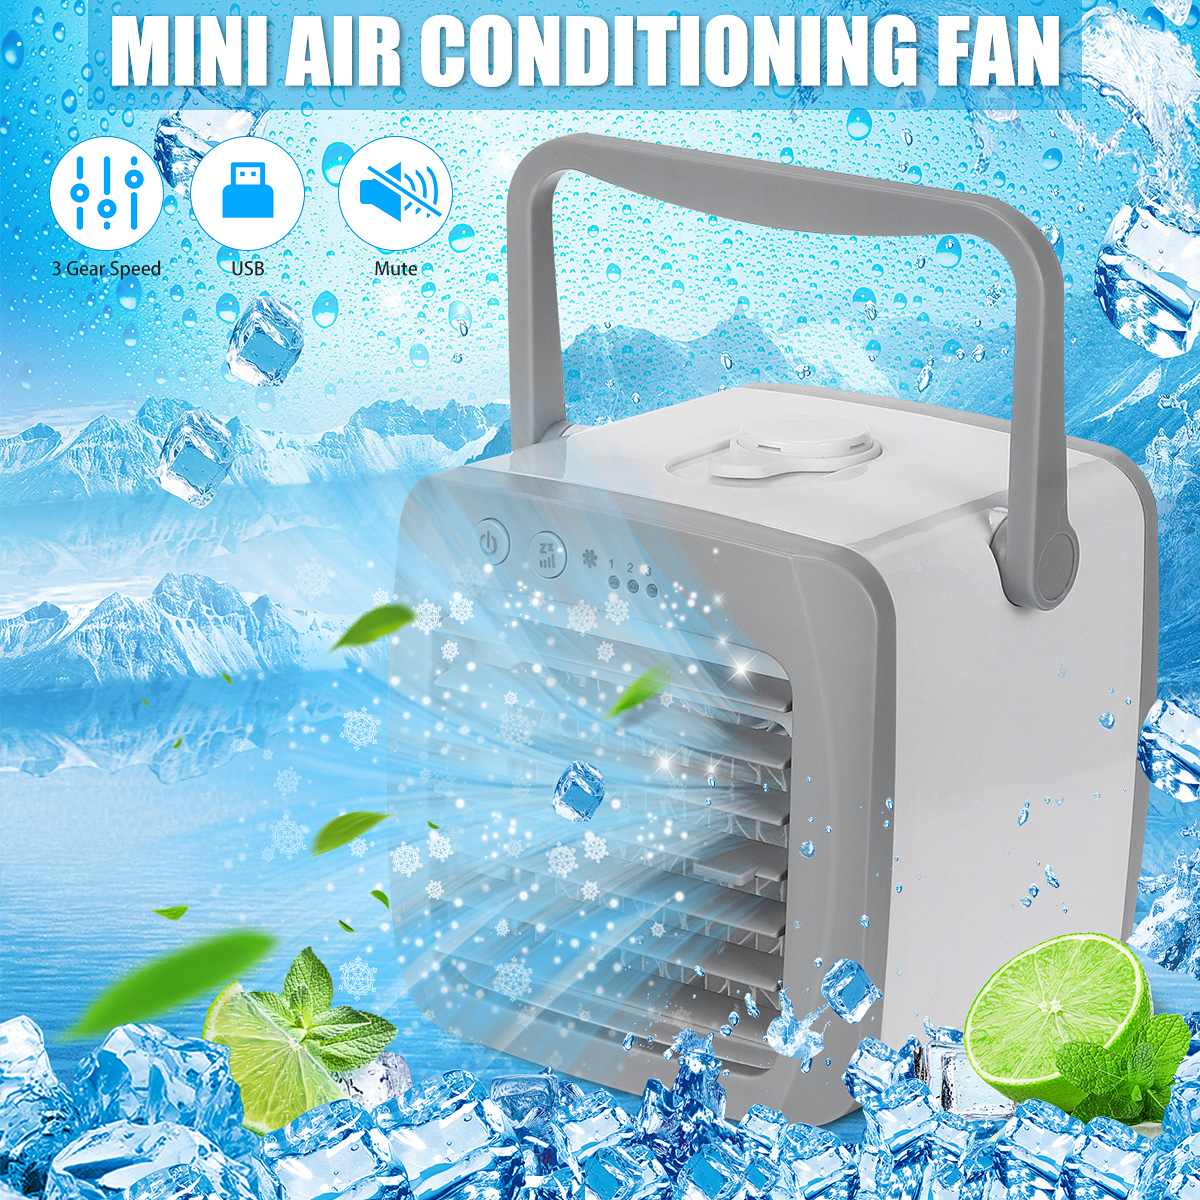 Home Mini Air Conditioner Portable Air Cooler Personal Space Air Cooling USB Rechargeable Air Conditioning 3 Speeds Desk Fan